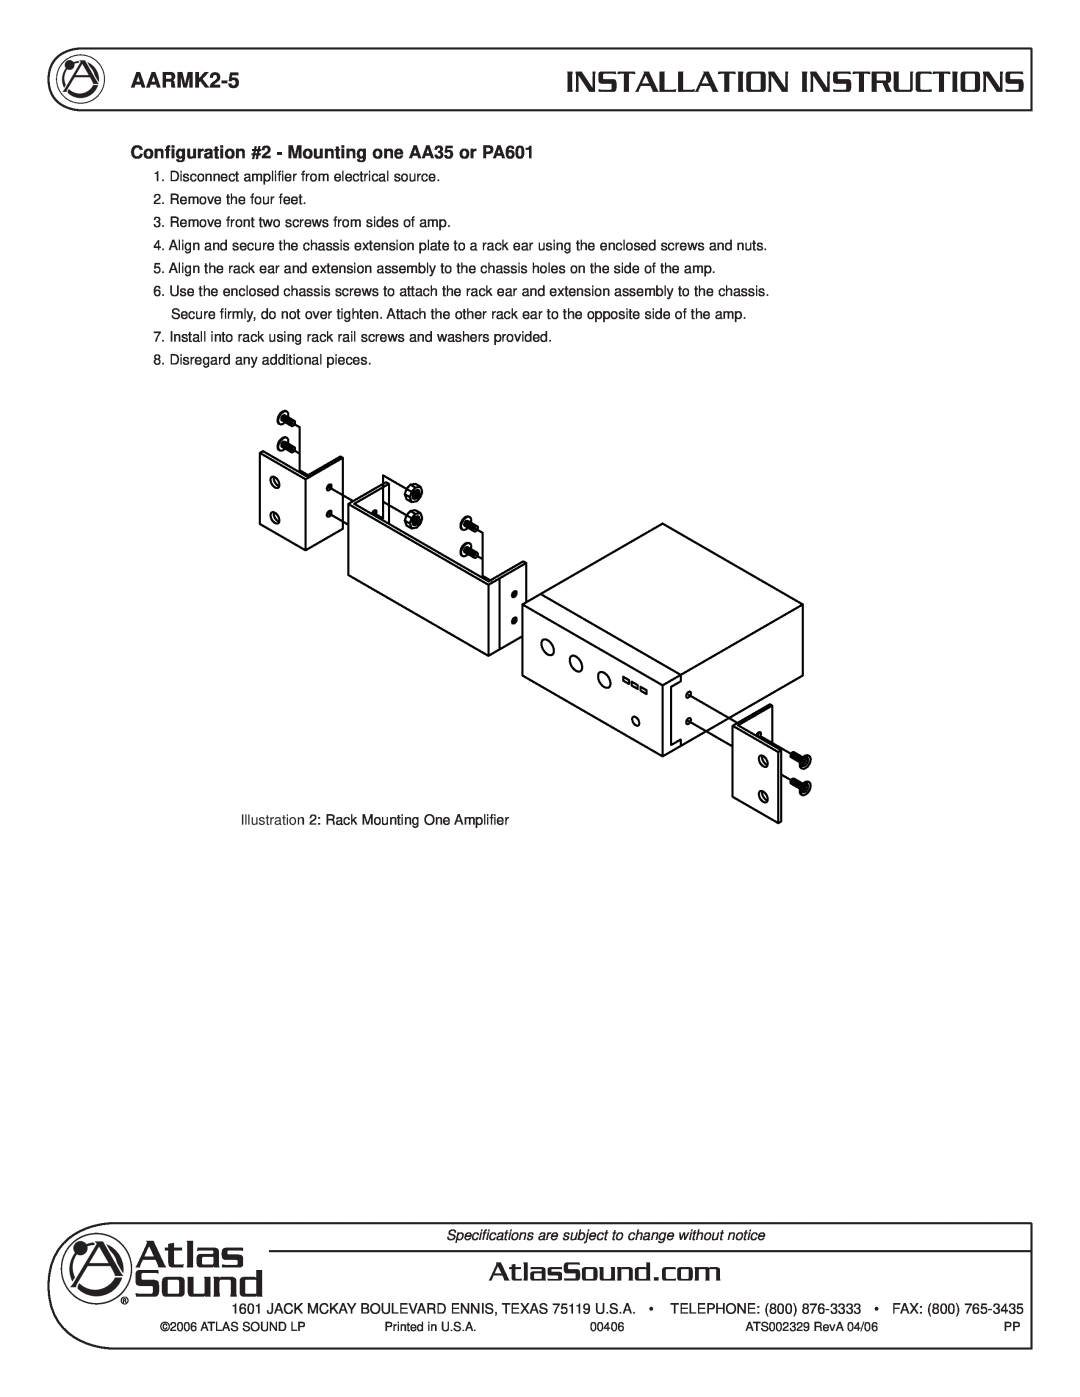 Atlas Sound AARMK2-5 installation instructions Configuration #2 - Mounting one AA35 or PA601, Installation Instructions 